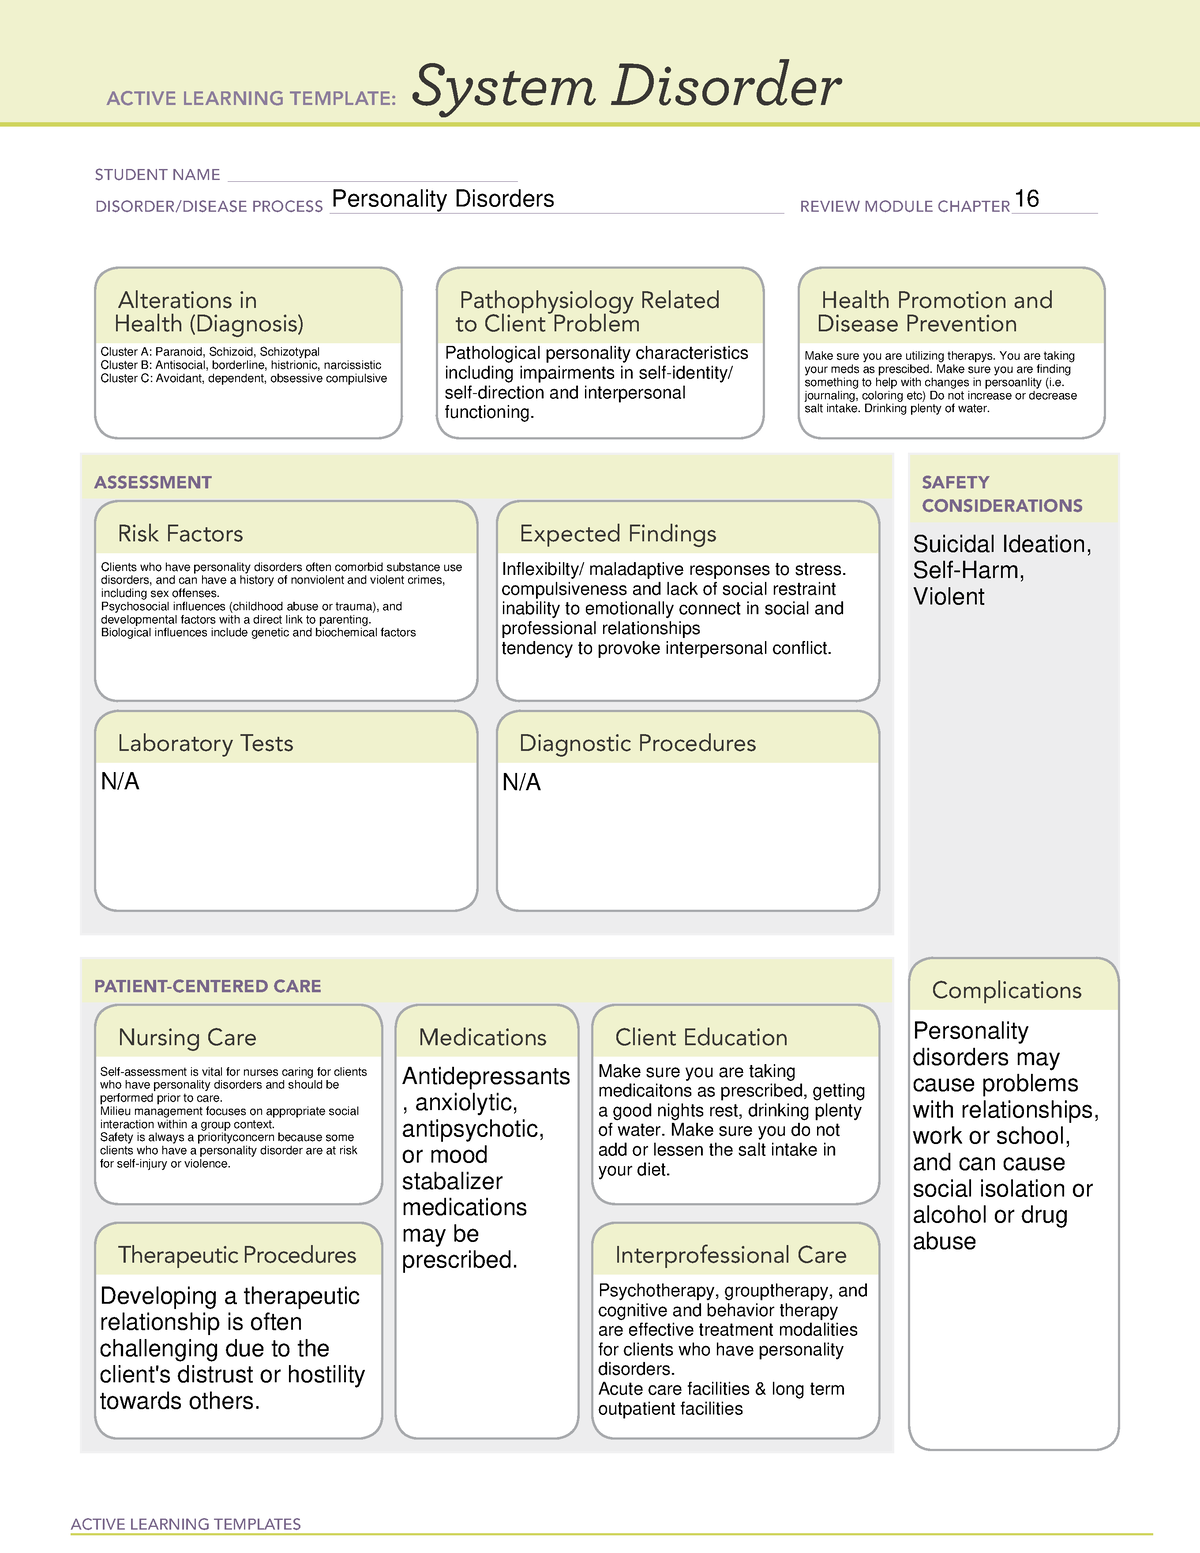 System Disorder Personality Disorder ACTIVE LEARNING TEMPLATES